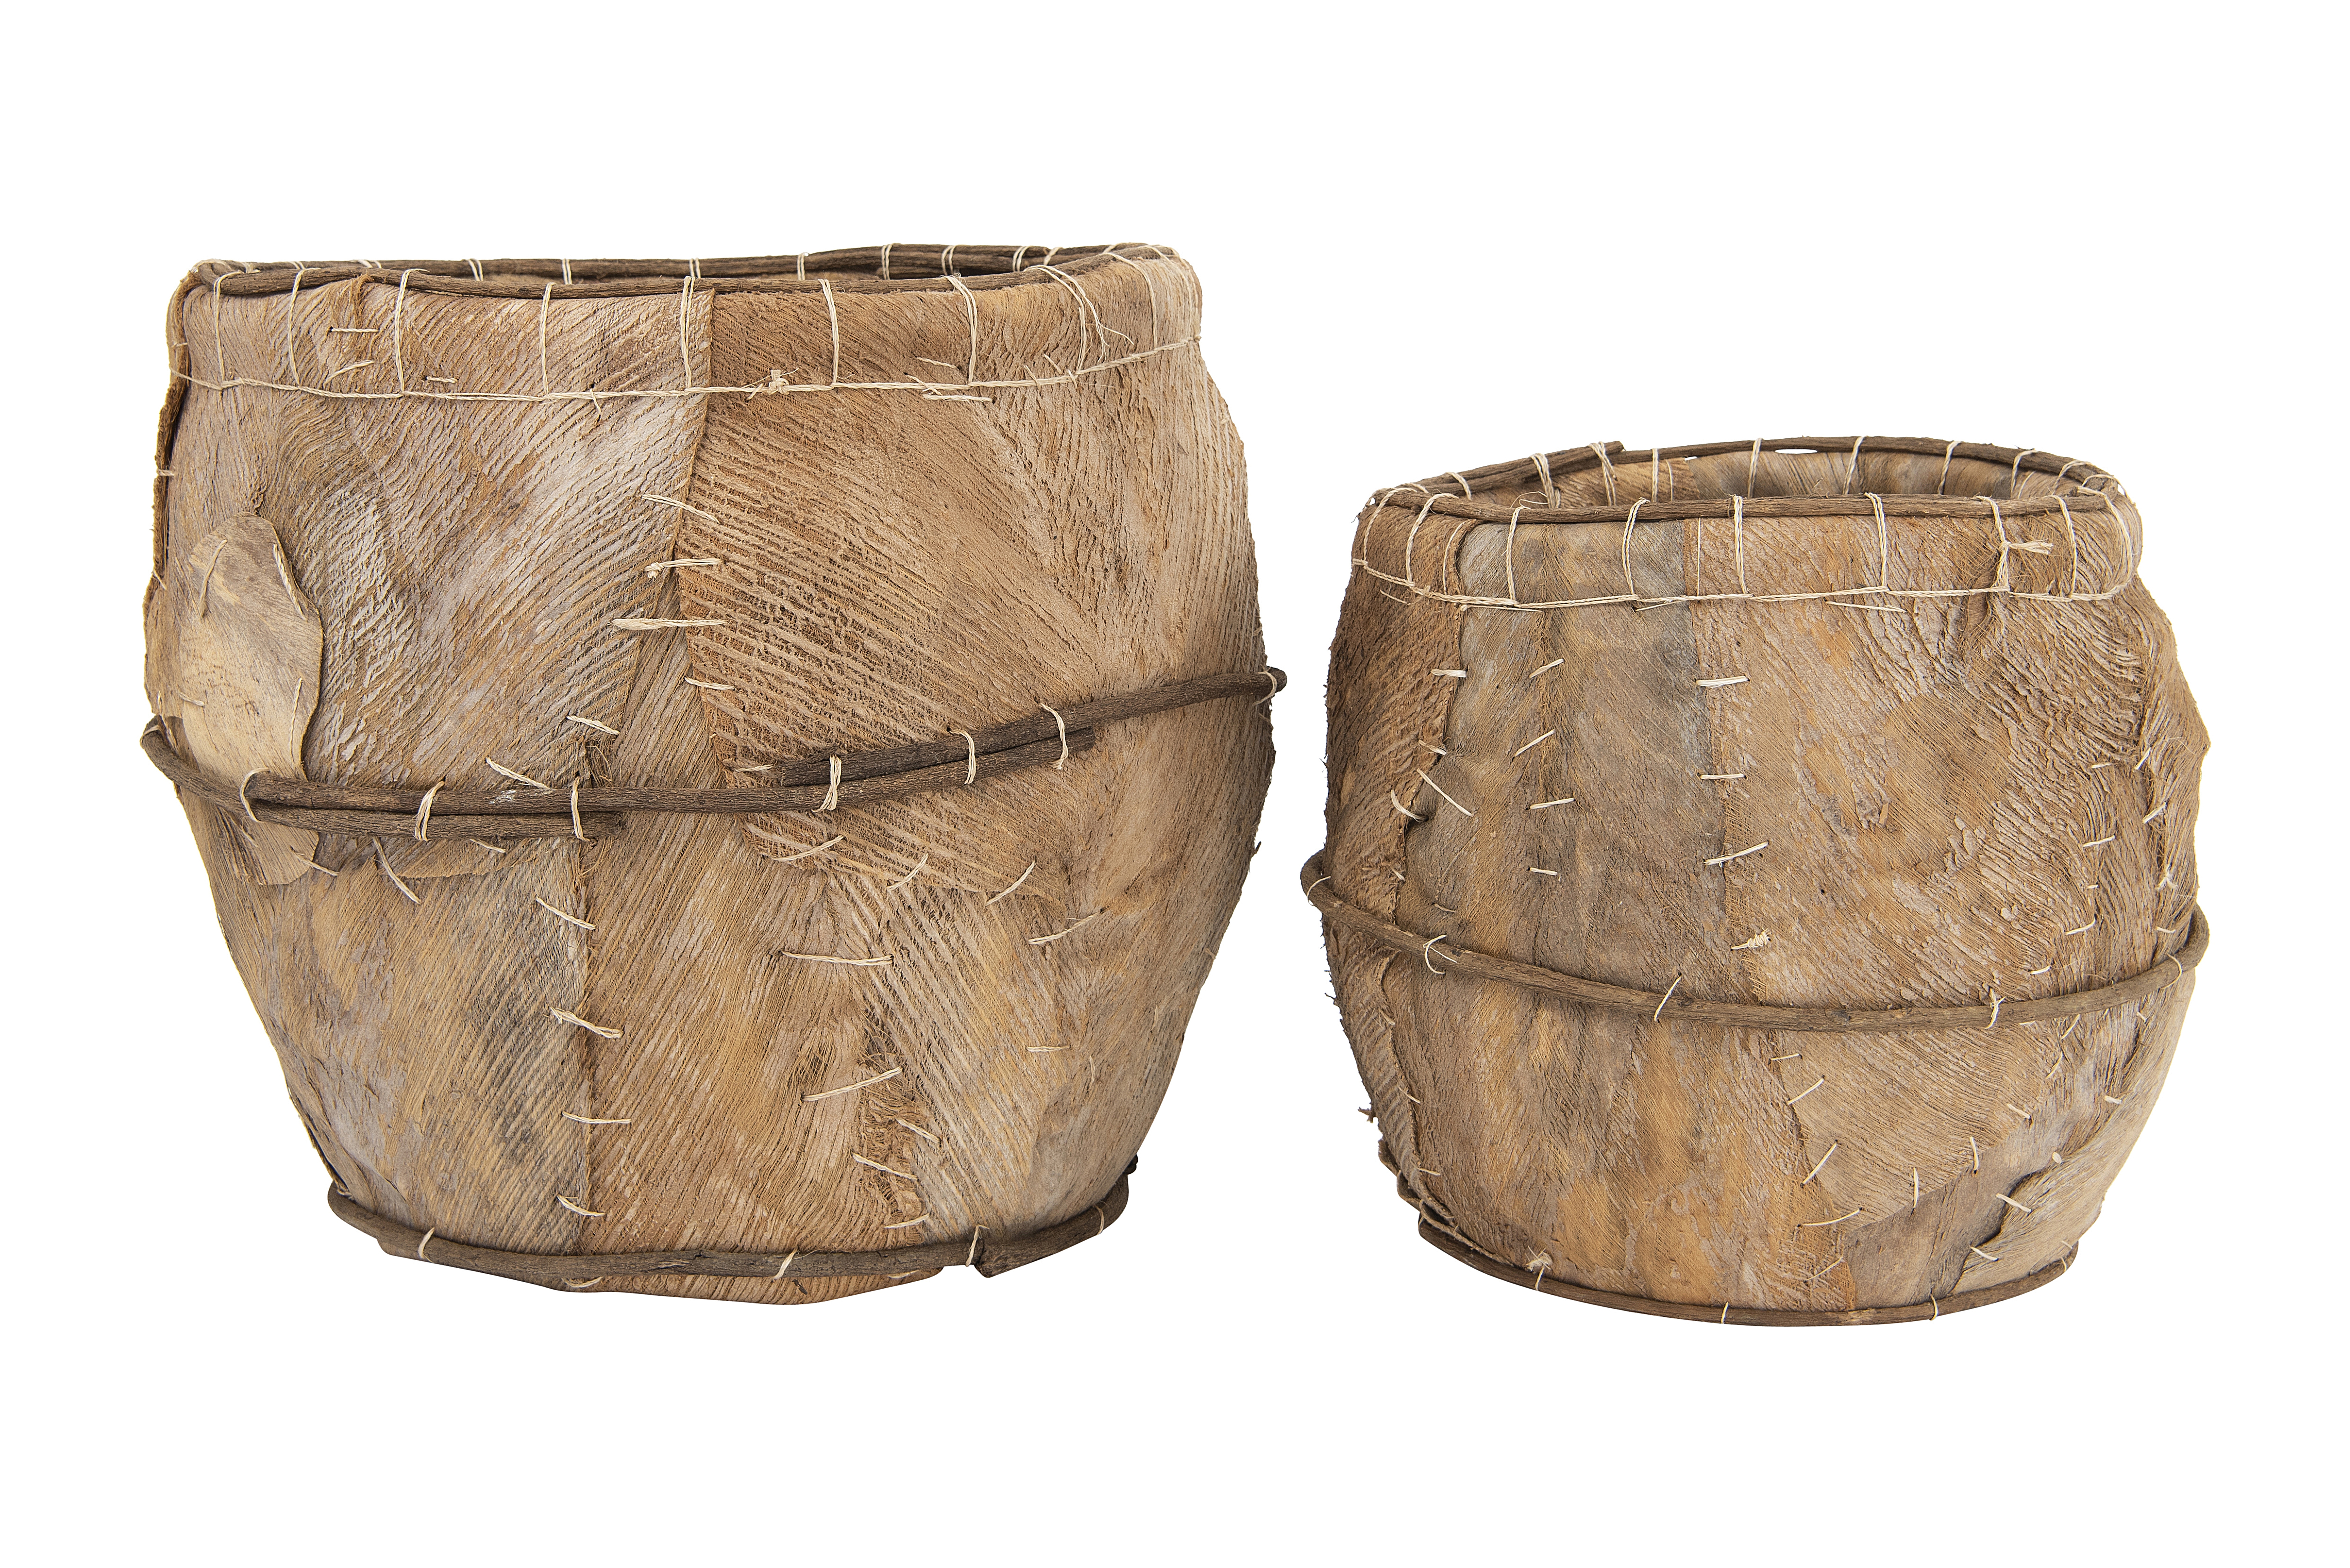 Handmade Coca Leaf Planters with Plastic Lining (Set of 2 Sizes/Hold 17" & 20" Pots) Each one will vary - Nomad Home